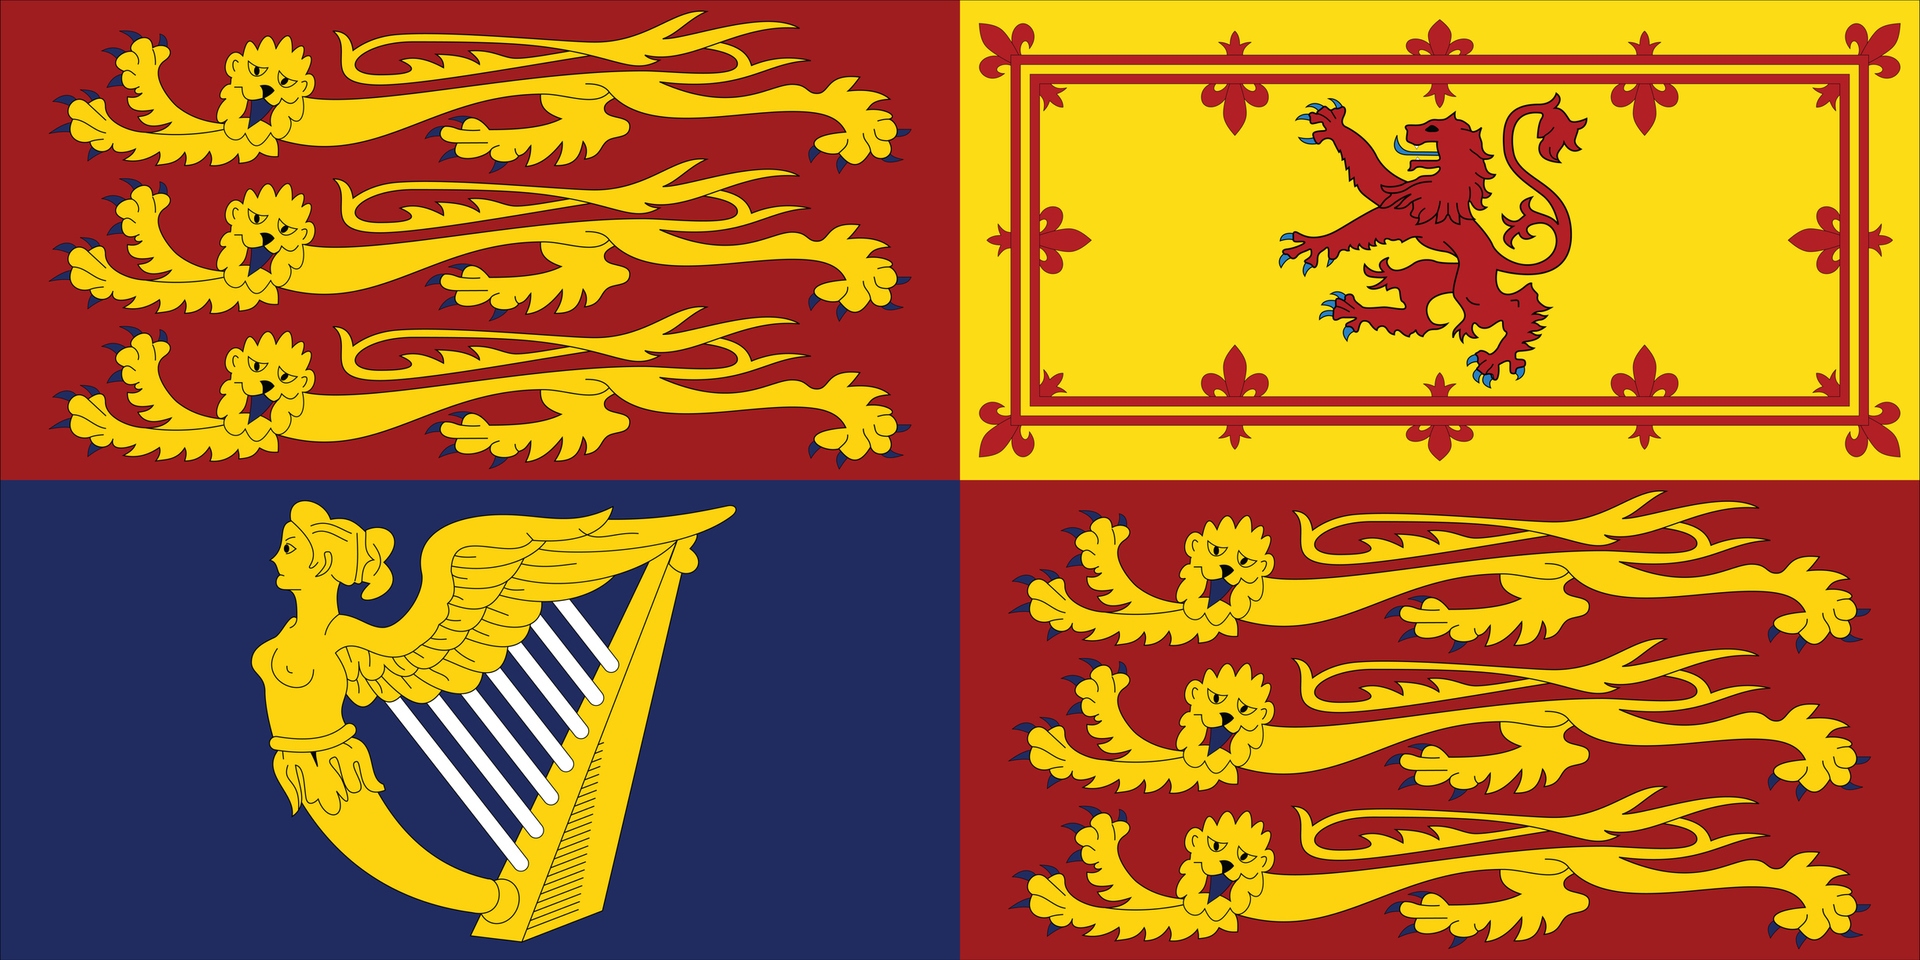 The Royal Standard of the UK does not bear Welsh representation. (Image: iStock)